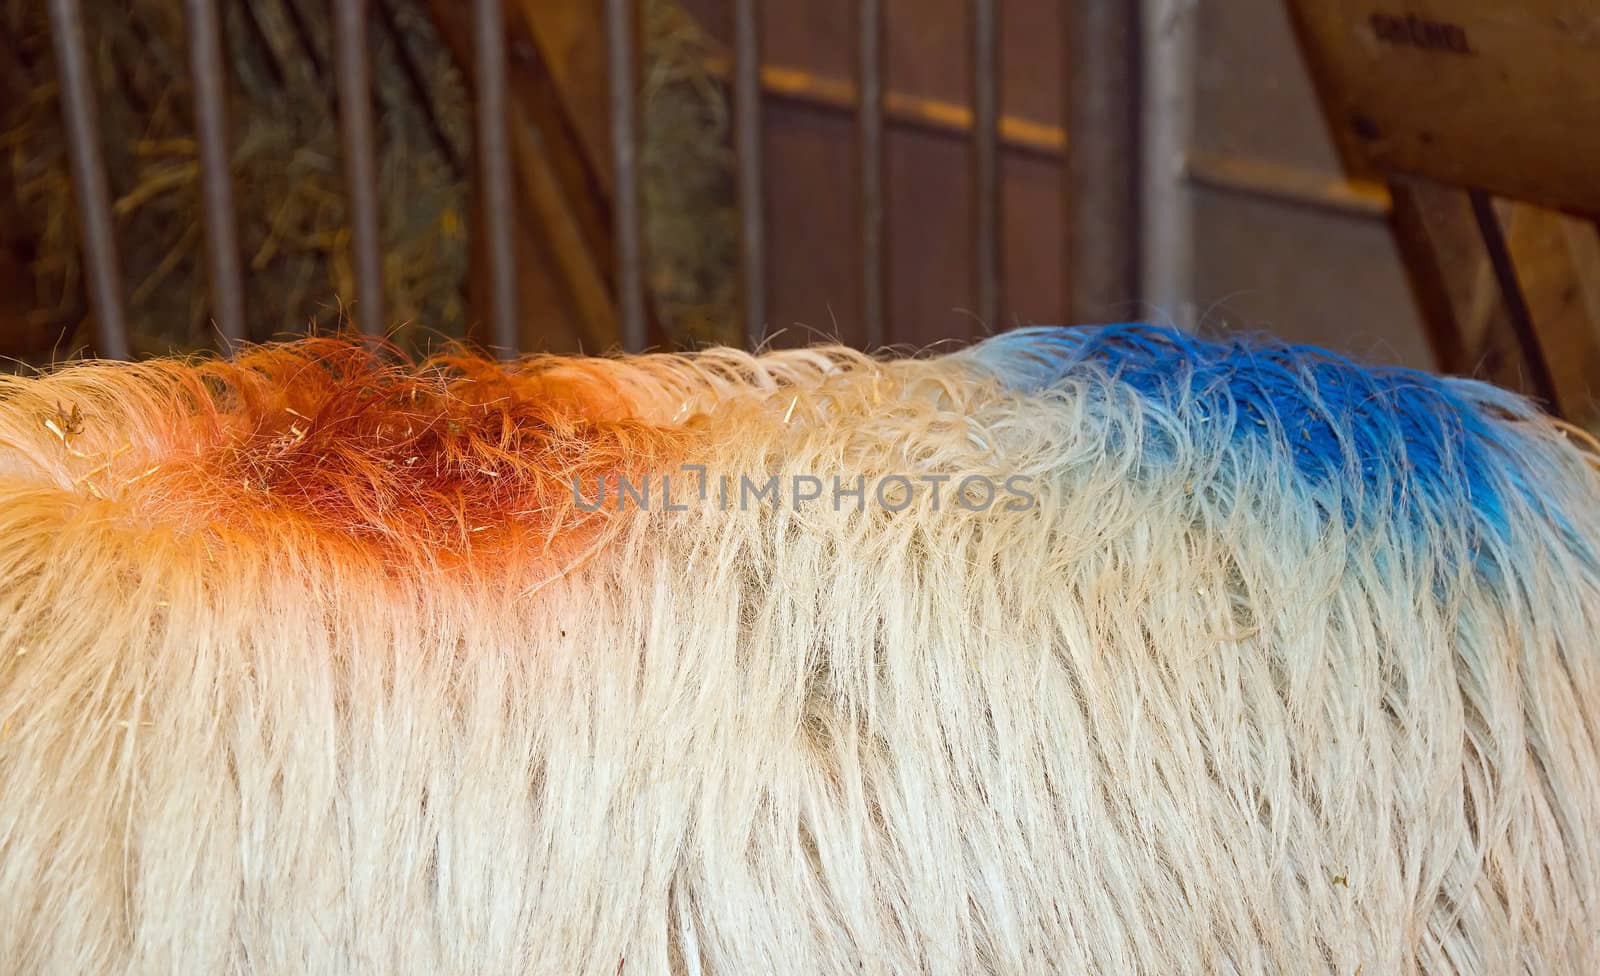 French sheep production  the colors of the French flag on his back  blue, white, red